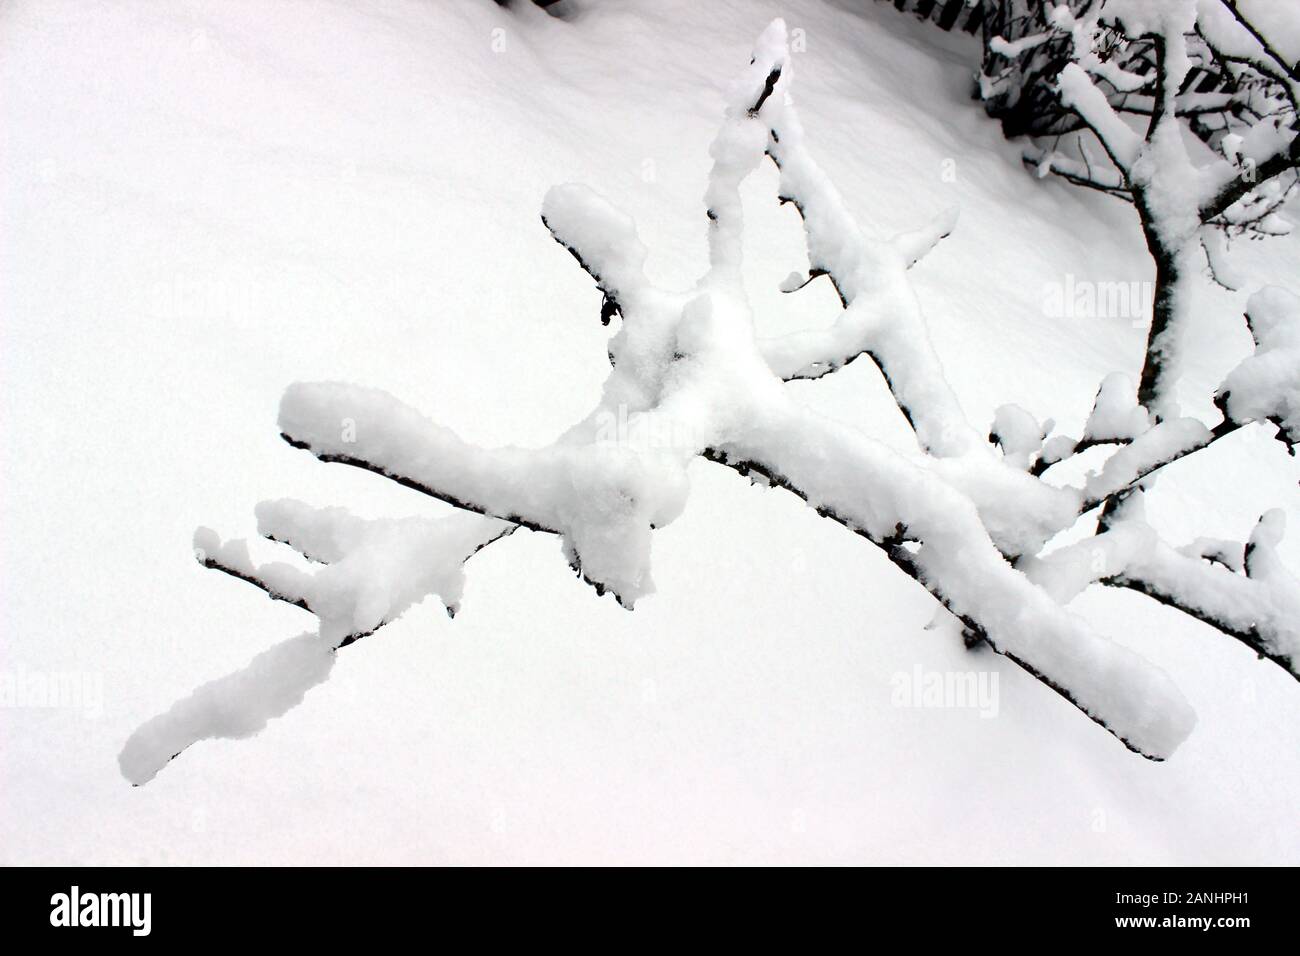 Completely snow covered branch Stock Photo